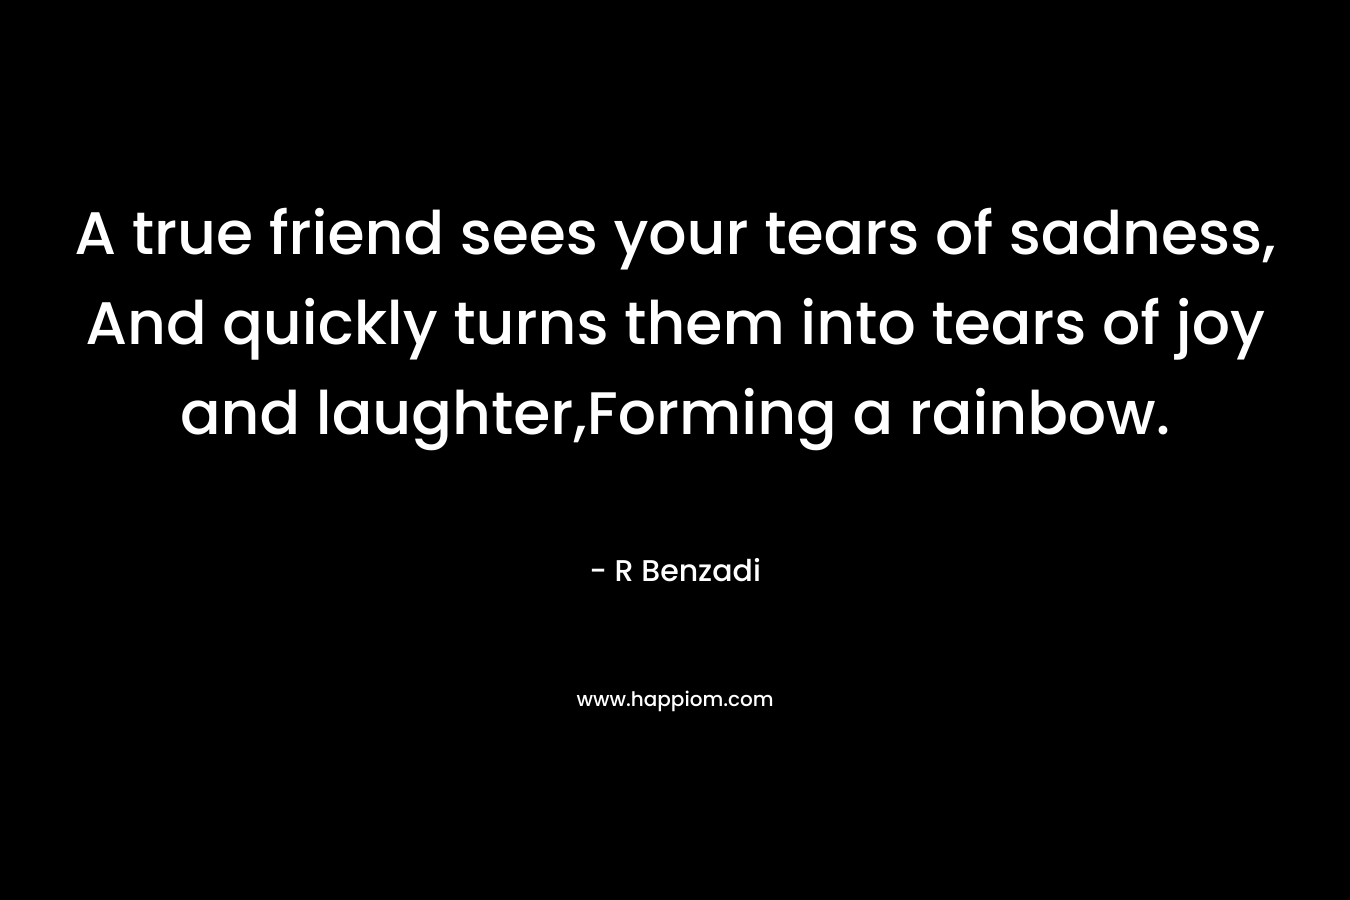 A true friend sees your tears of sadness, And quickly turns them into tears of joy and laughter,Forming a rainbow. – R Benzadi